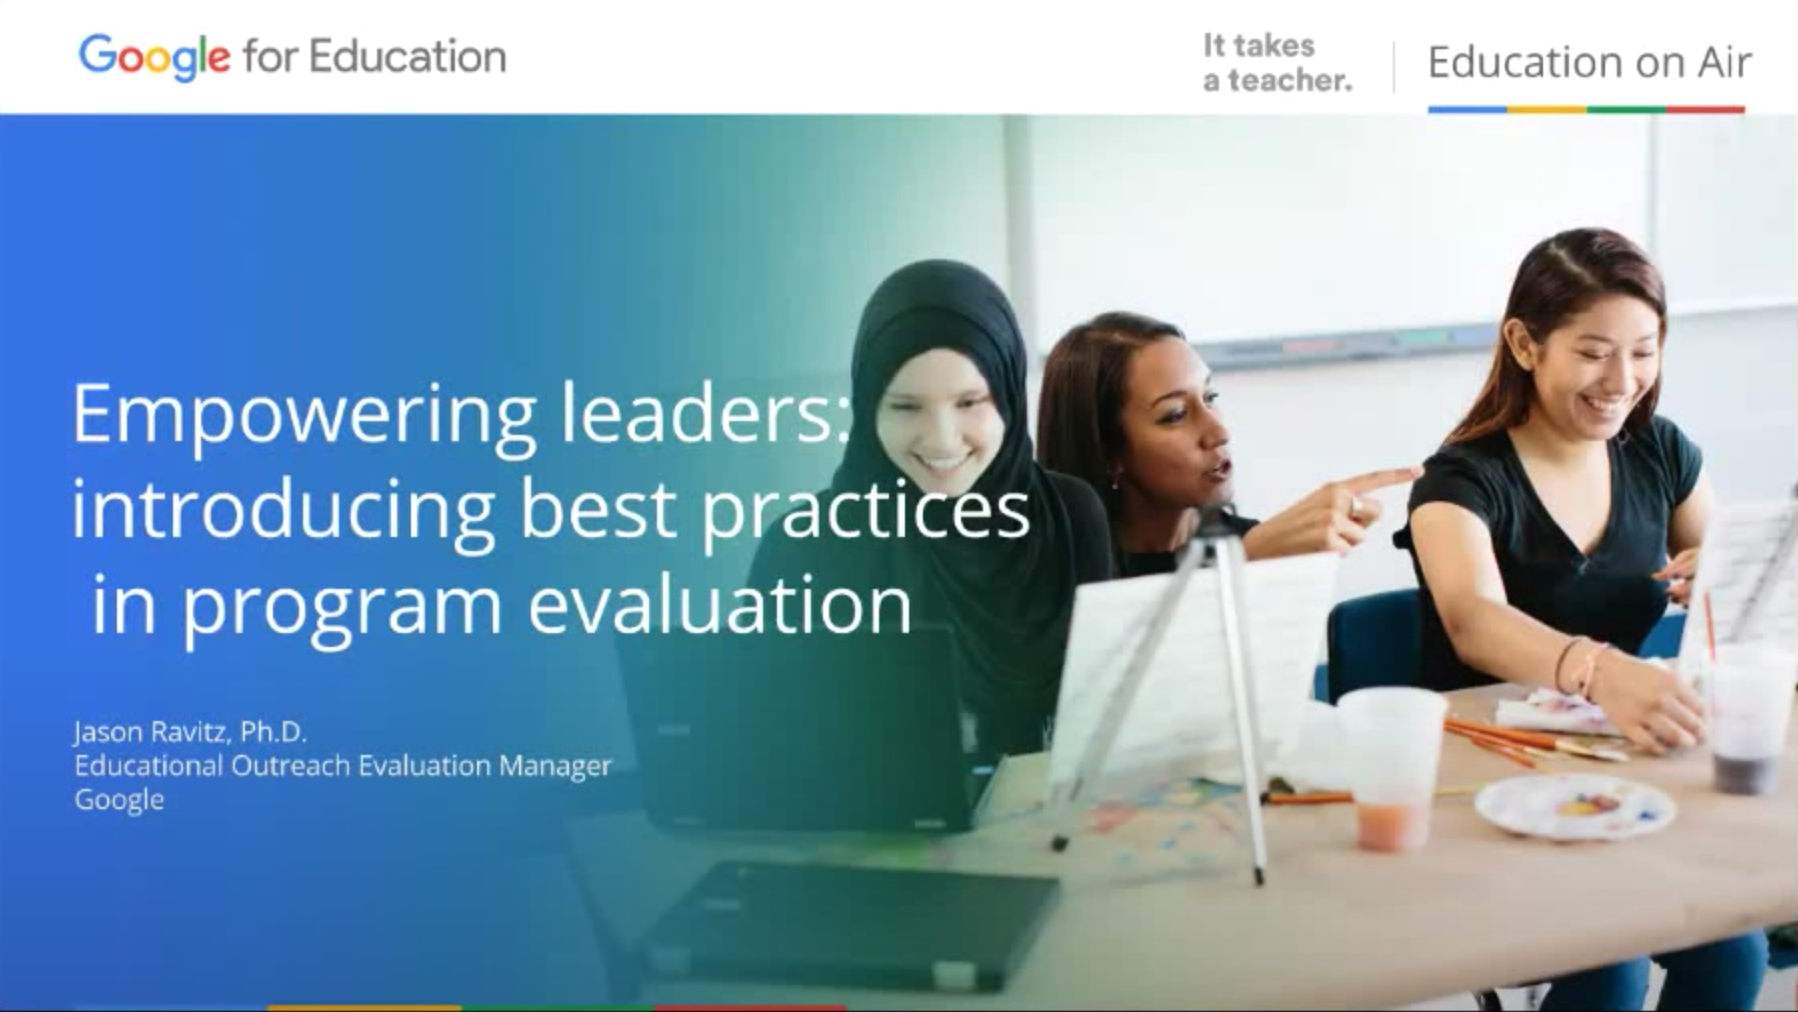 Empowering leaders introducing best practices in program evaluation Jason Ravitz Google for Education Edu on Air 2016